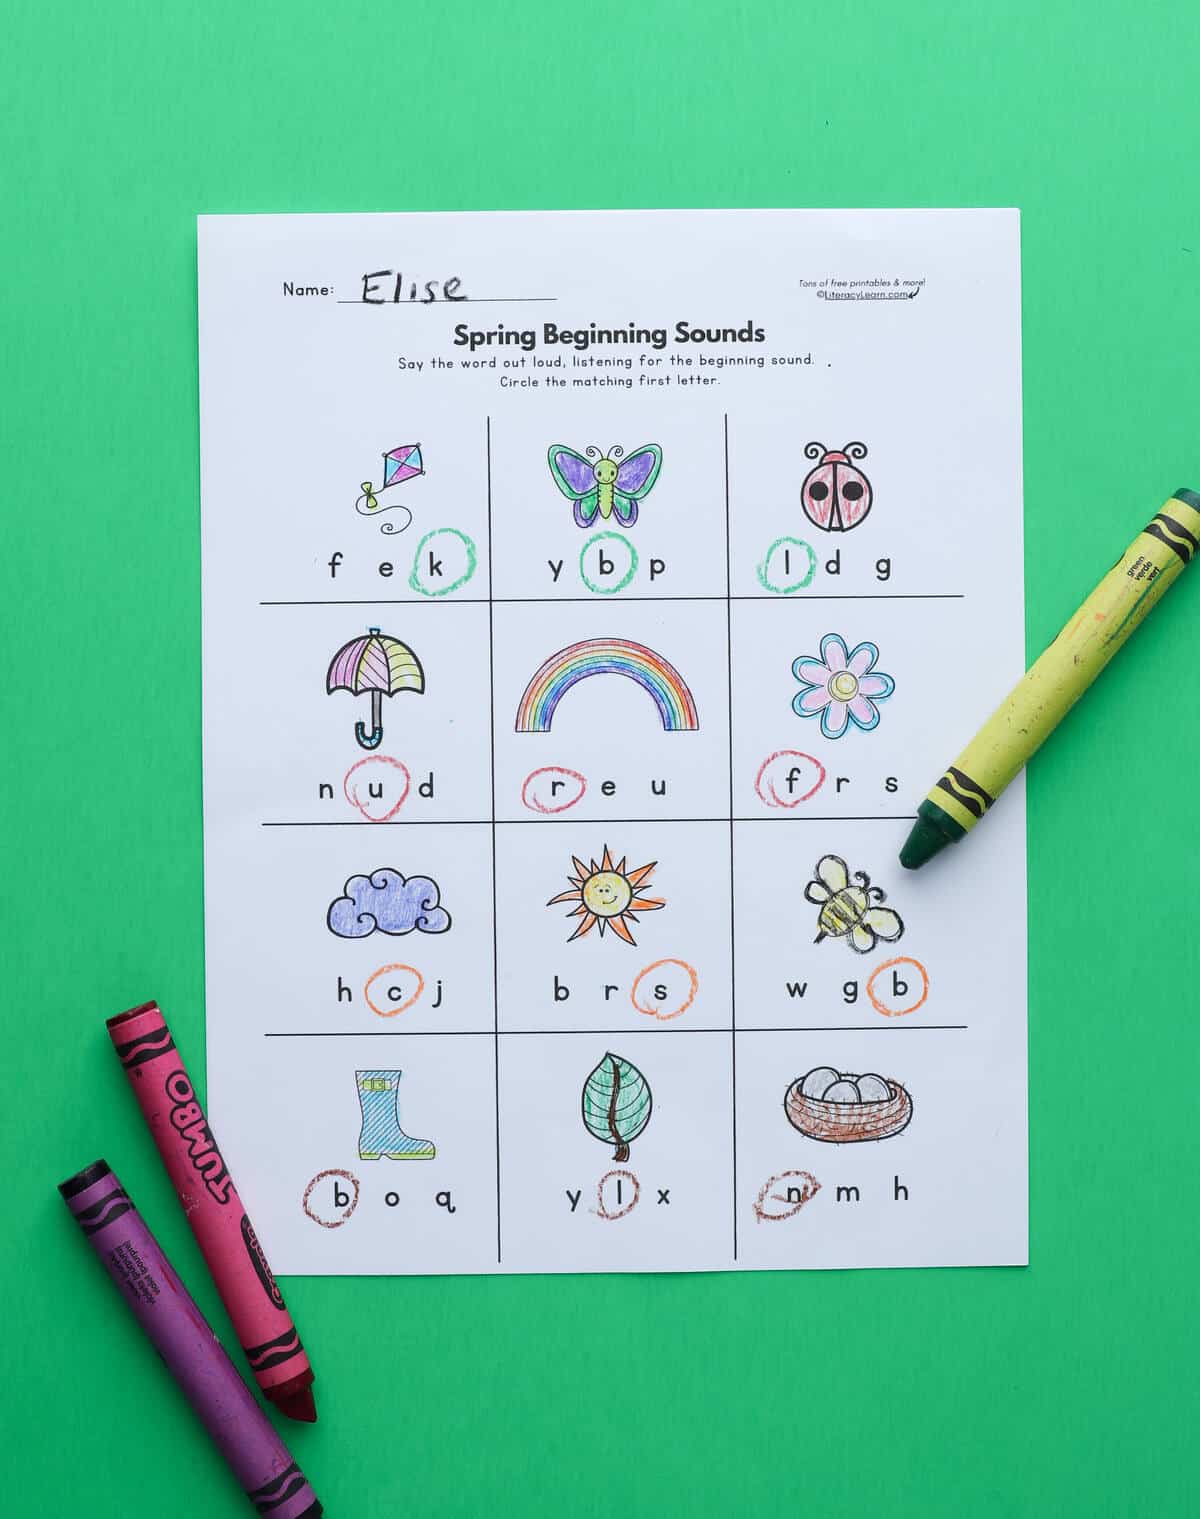 A printed spring-themed initial sounds worksheet on a green background.